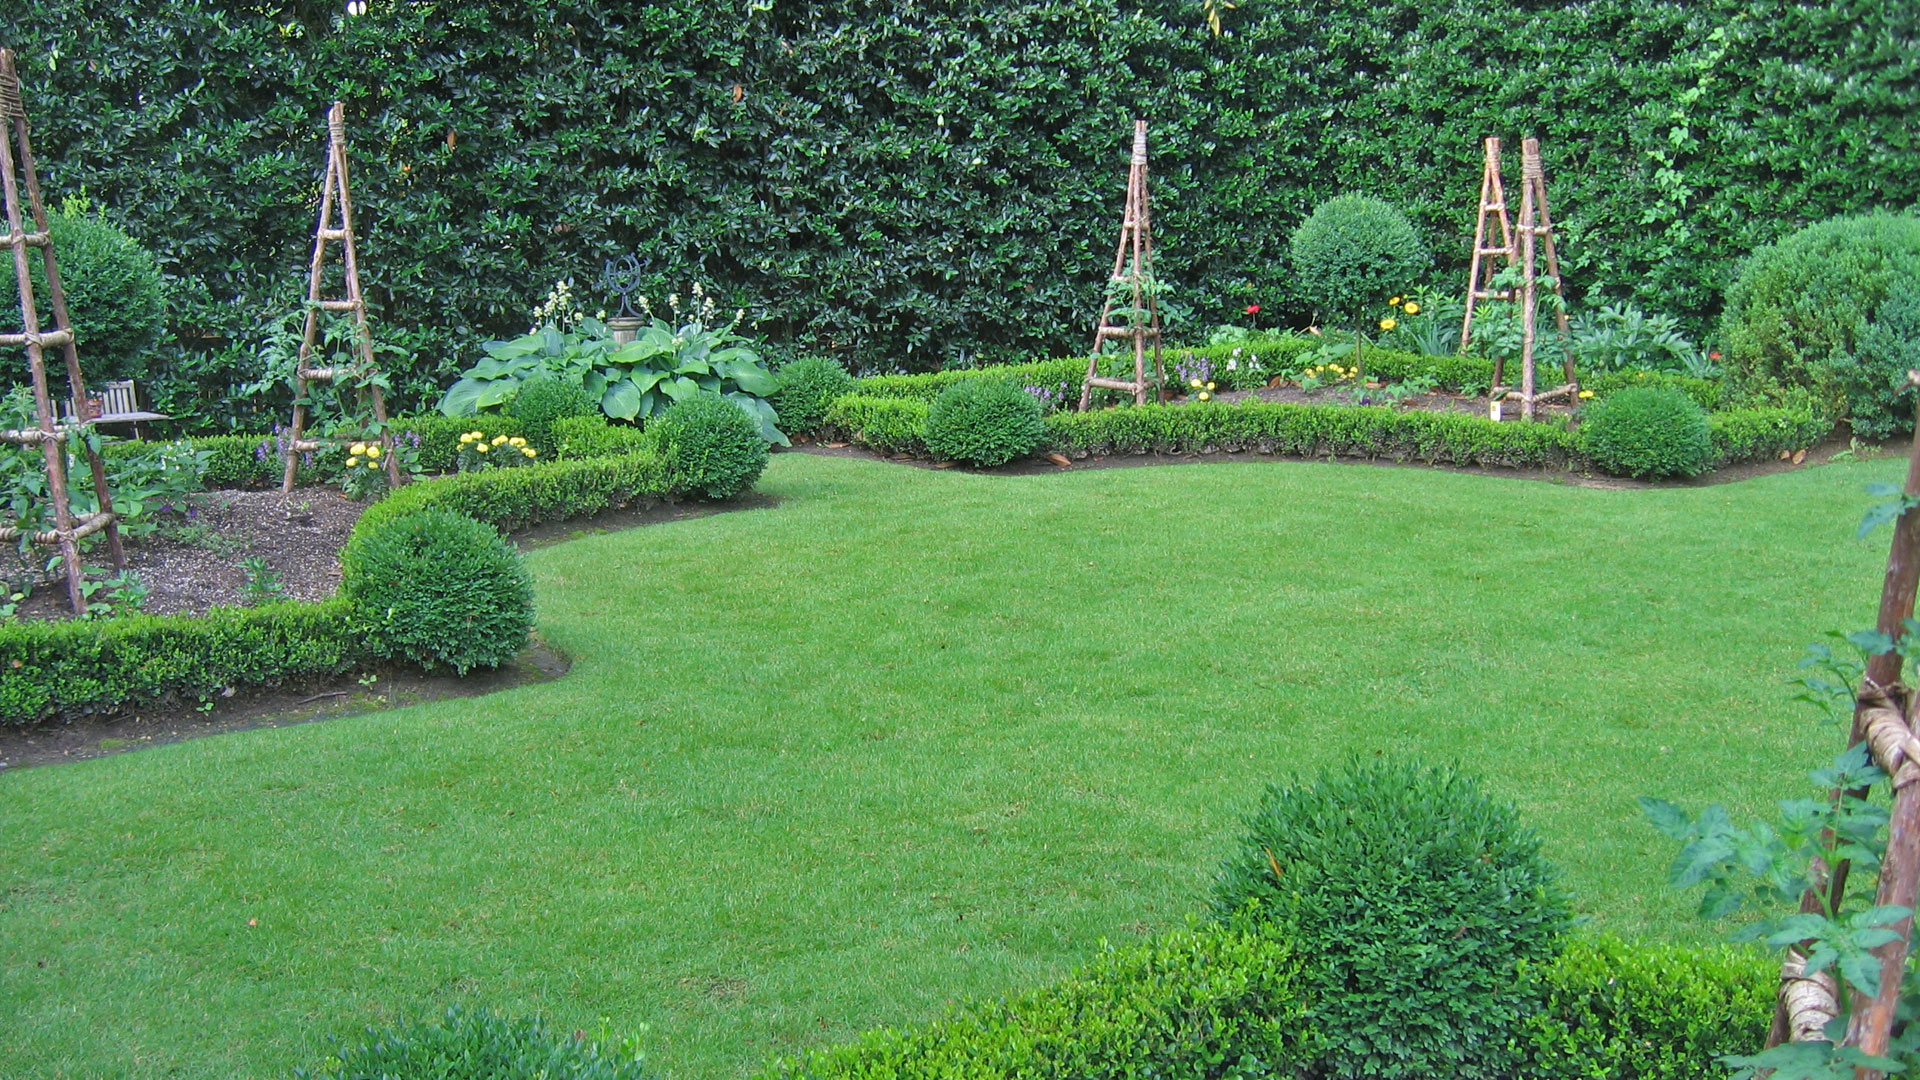 The backyard landscaping neatly trimmed by our team of professionals.